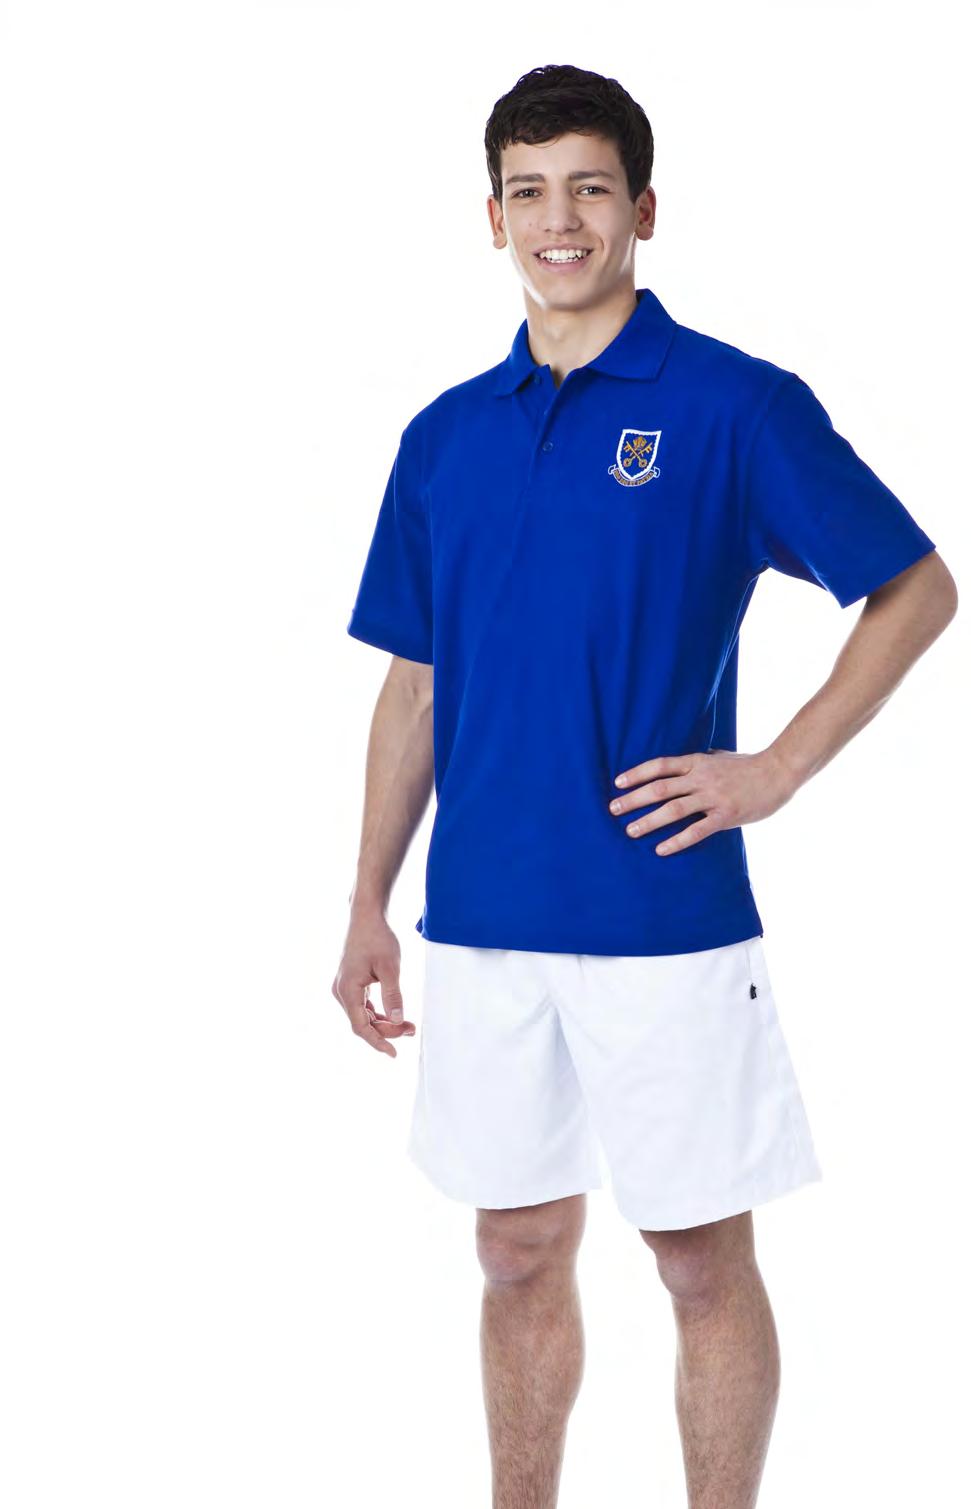 Physical Education Uniform Whole School Co-curricular Sports Uniform Whole School The Physical Education (PE) uniform must be worn in any PE classes and as directed.